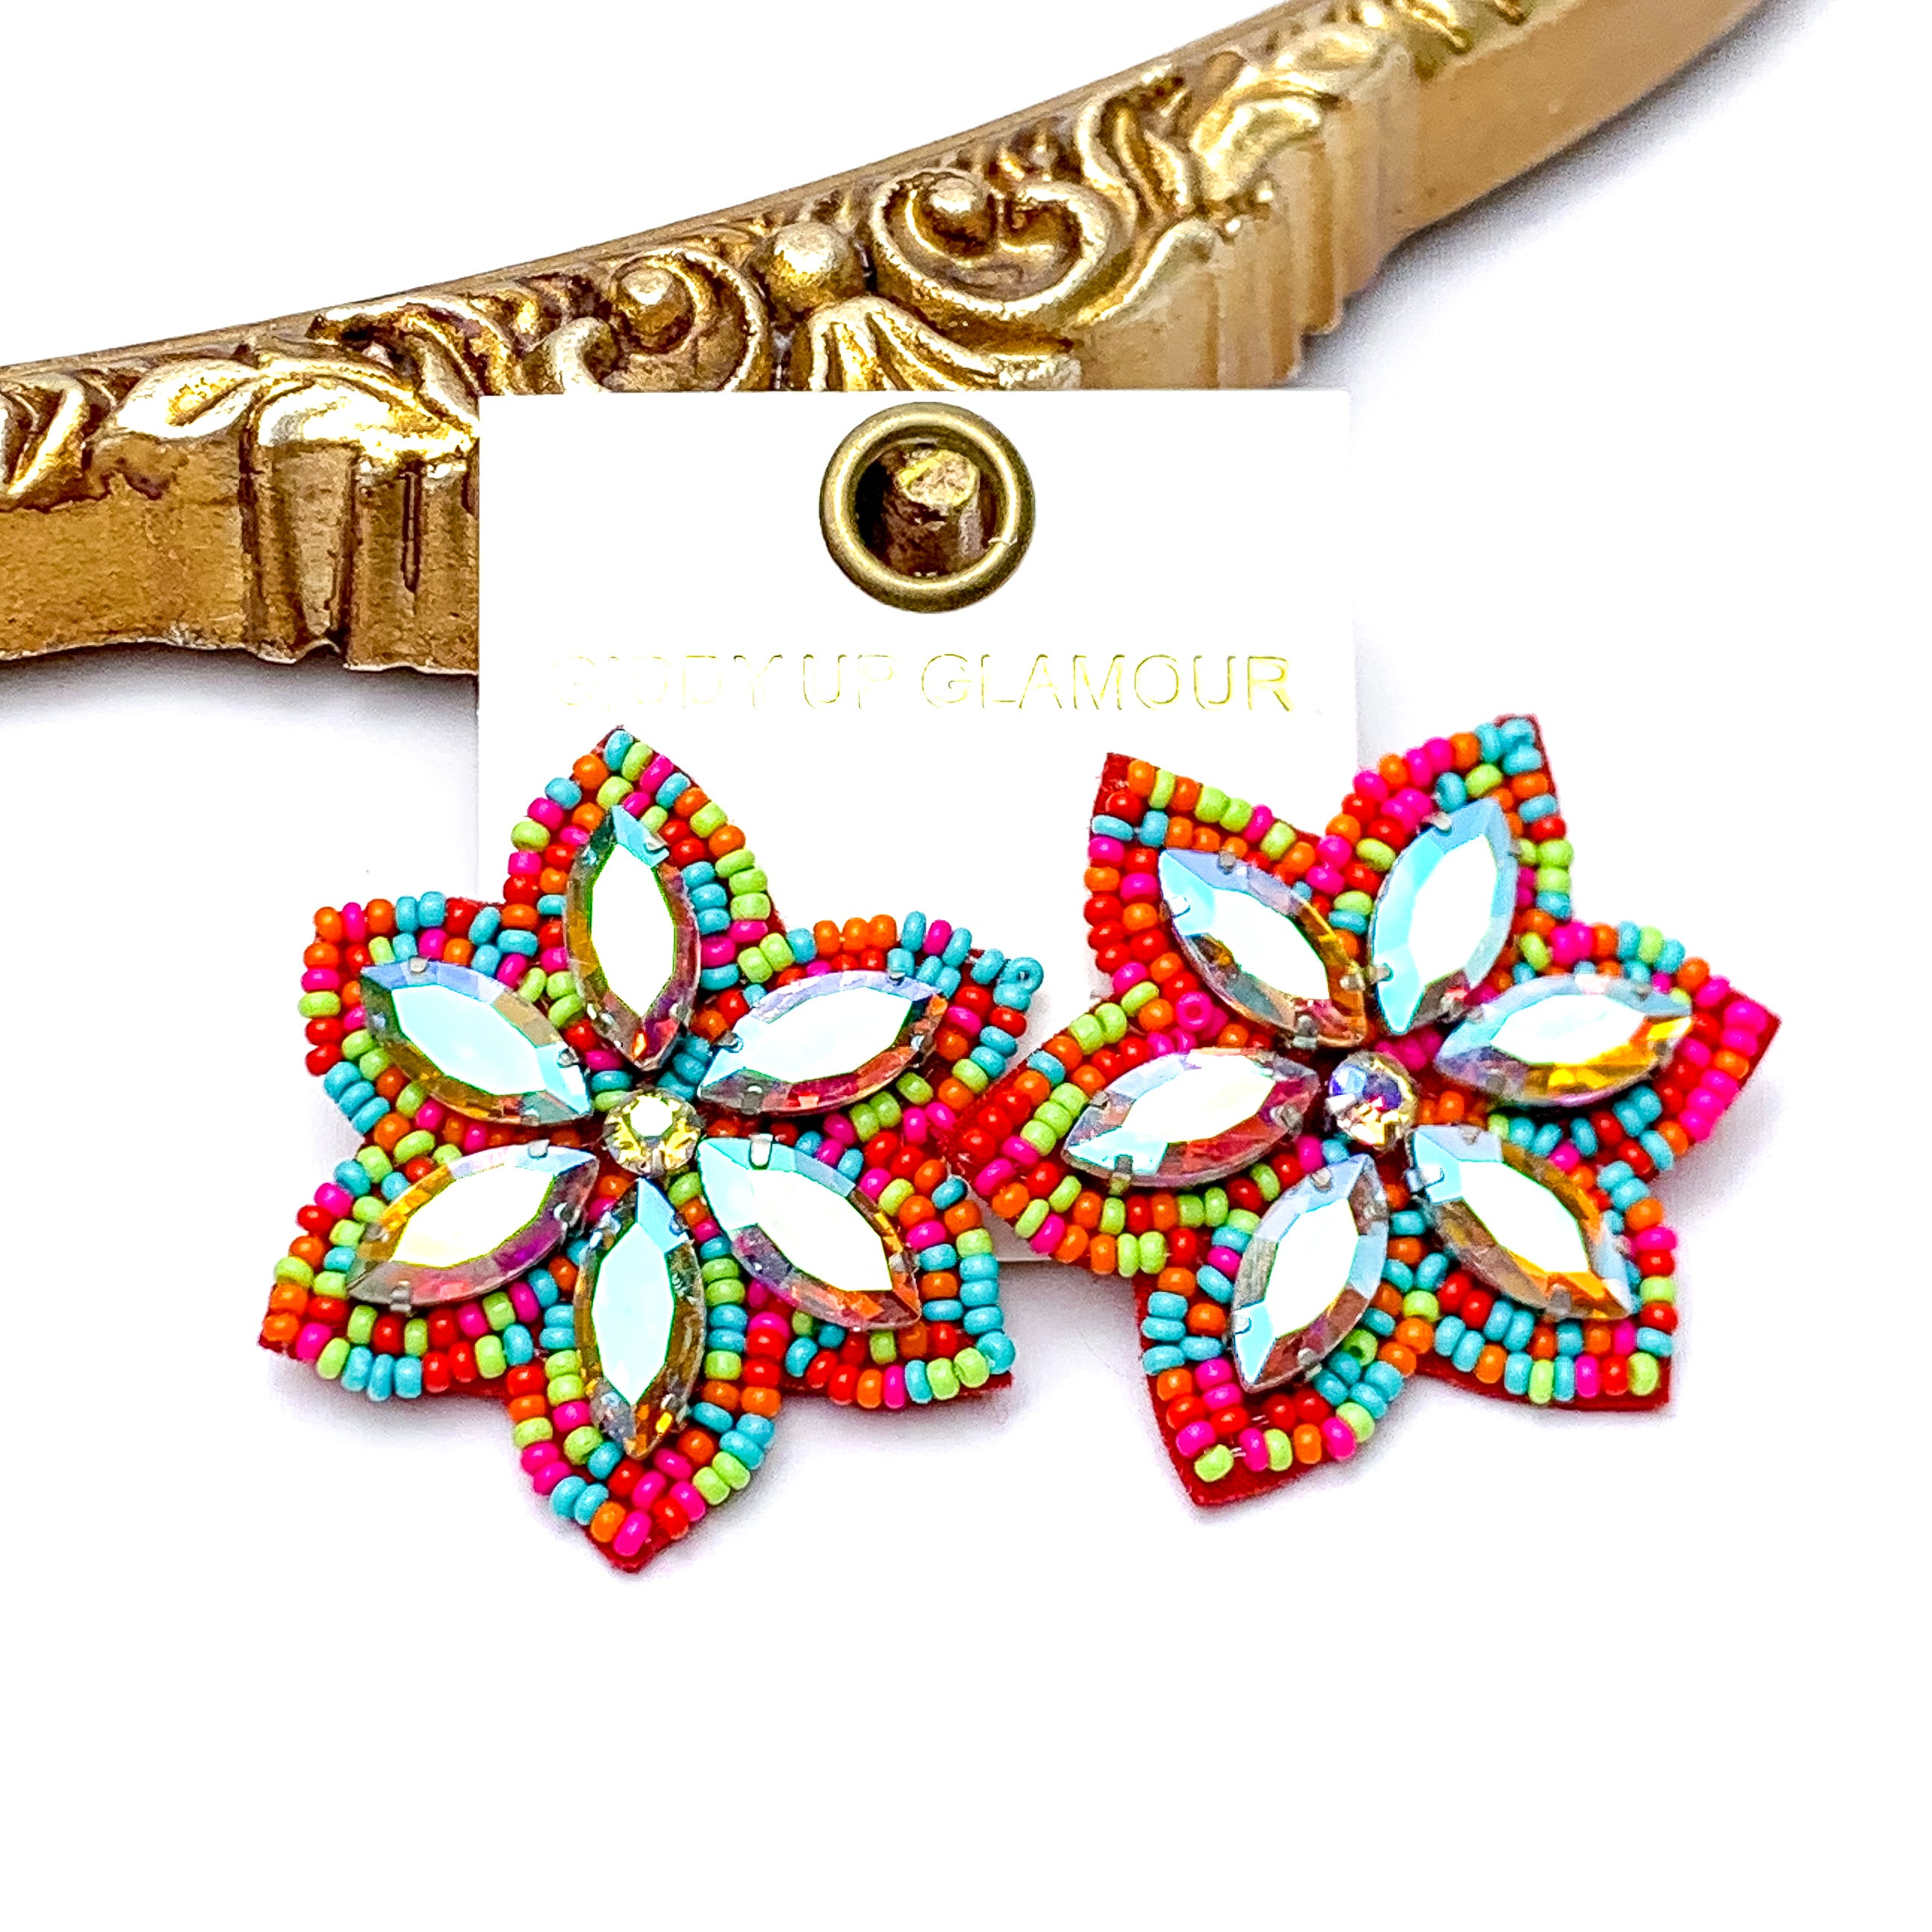 Prismatic Petals Seed Bead Flower Stud Earrings with AB stones in Red Multi Mix